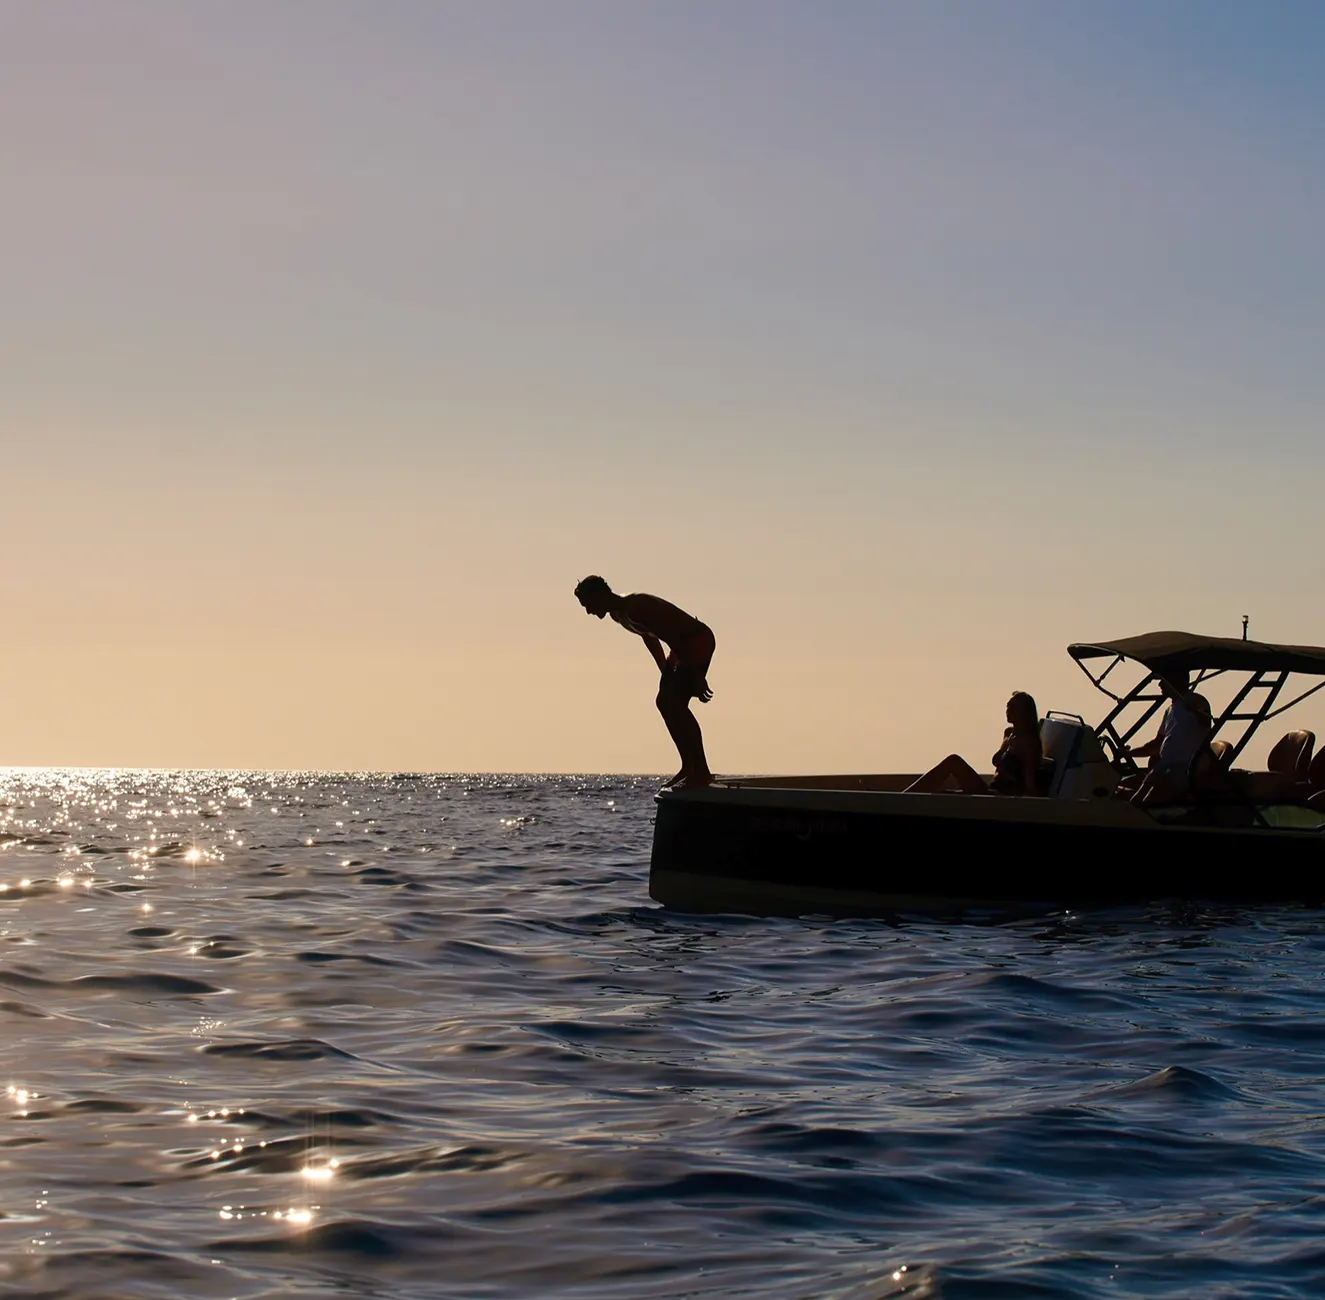 Diver plunging from compact boat into sunset-lit sea off southern Tenerife coast